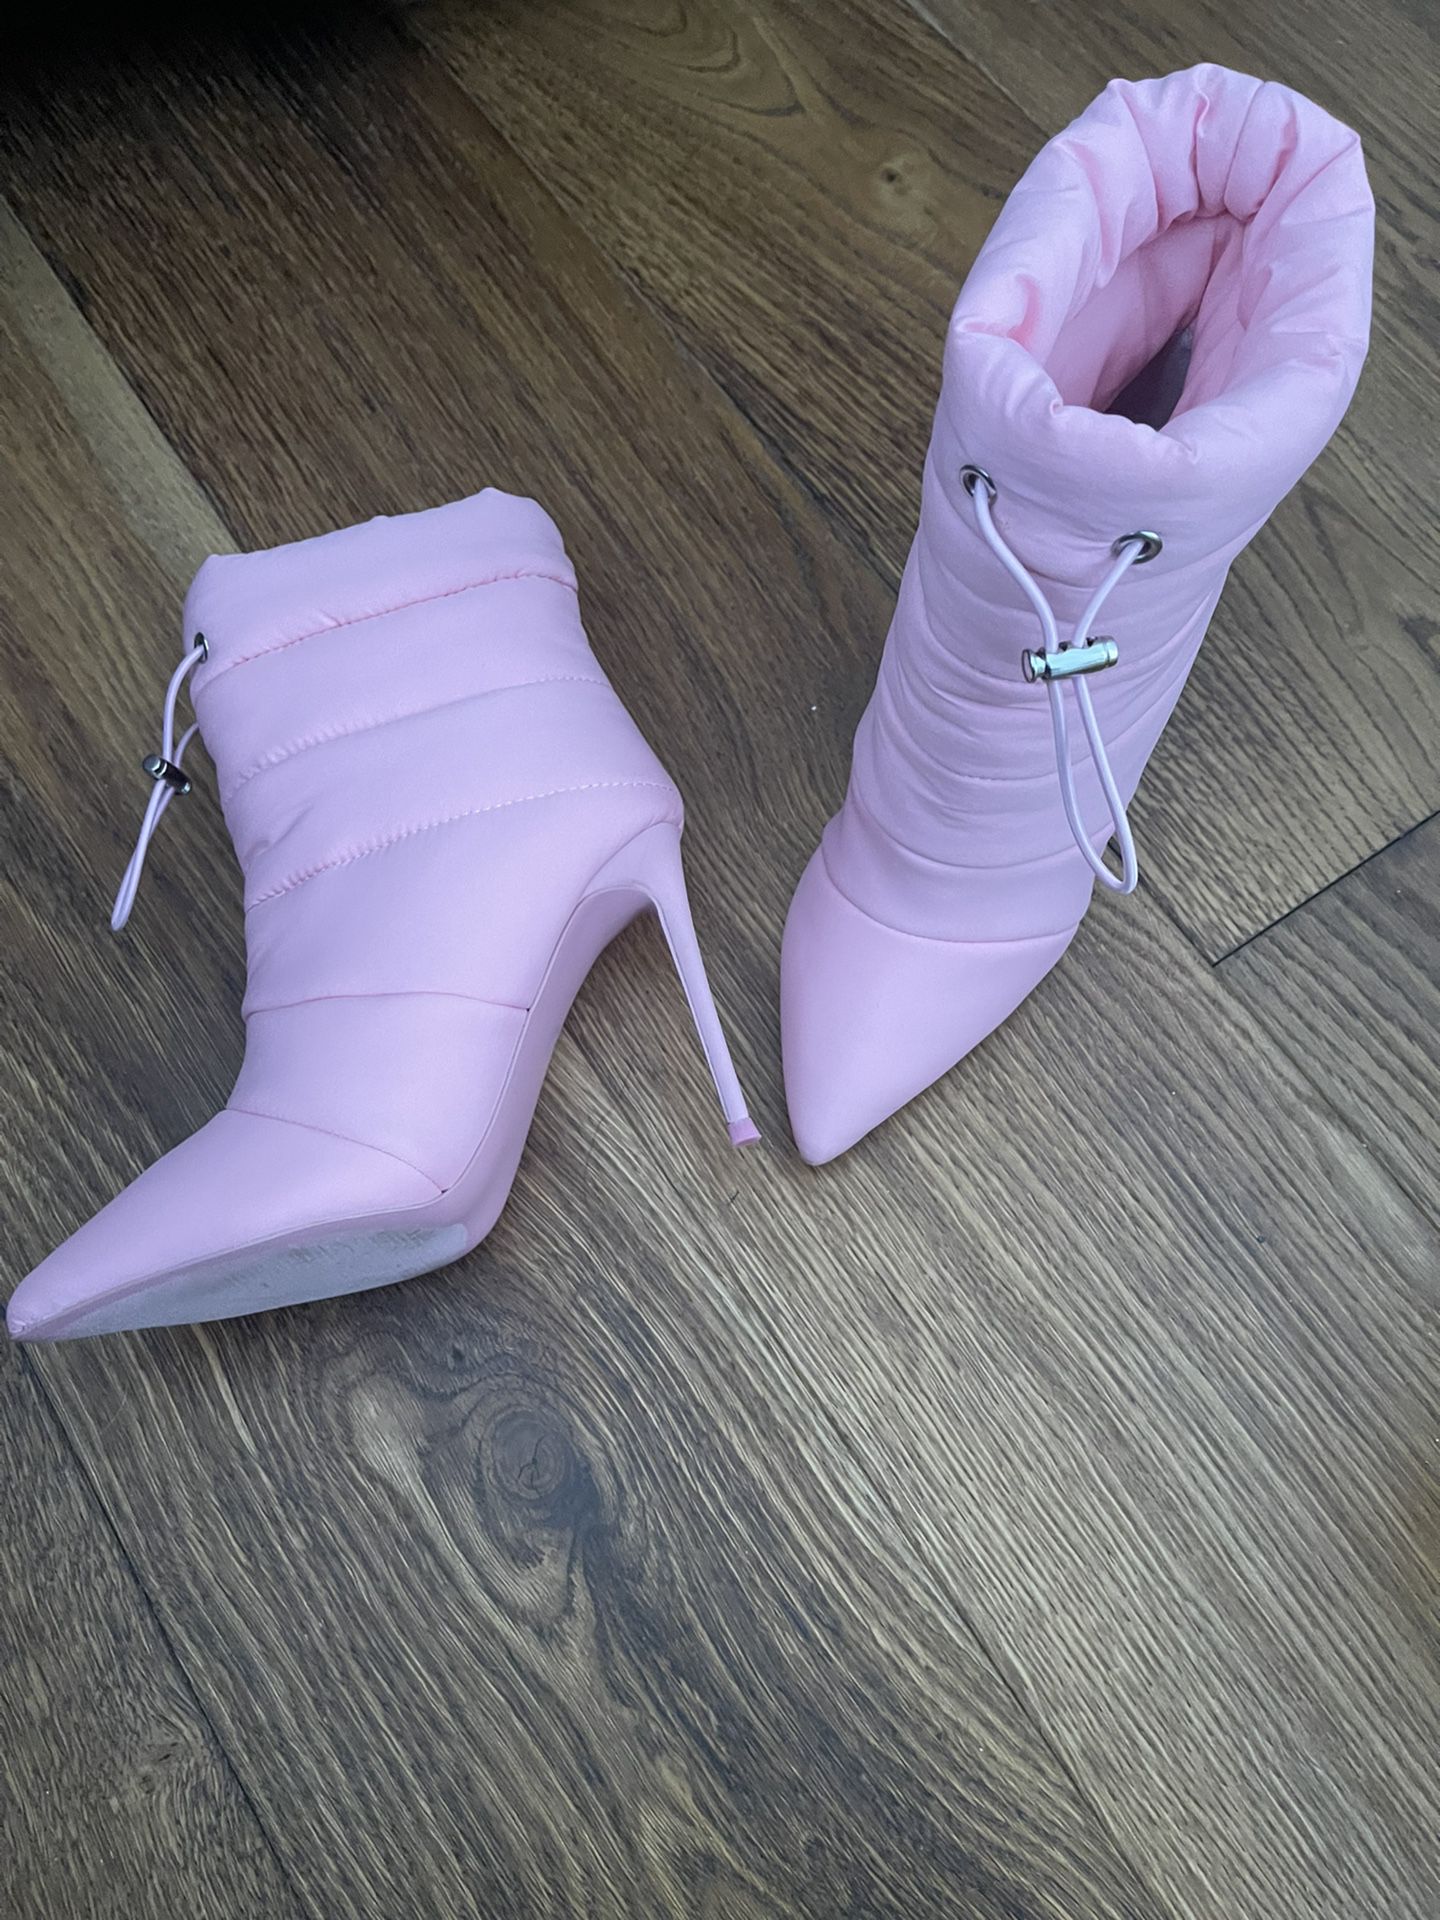 Pink Ankle Boots Shoes 6 Or 5.5 Steve Madden Worn Once 